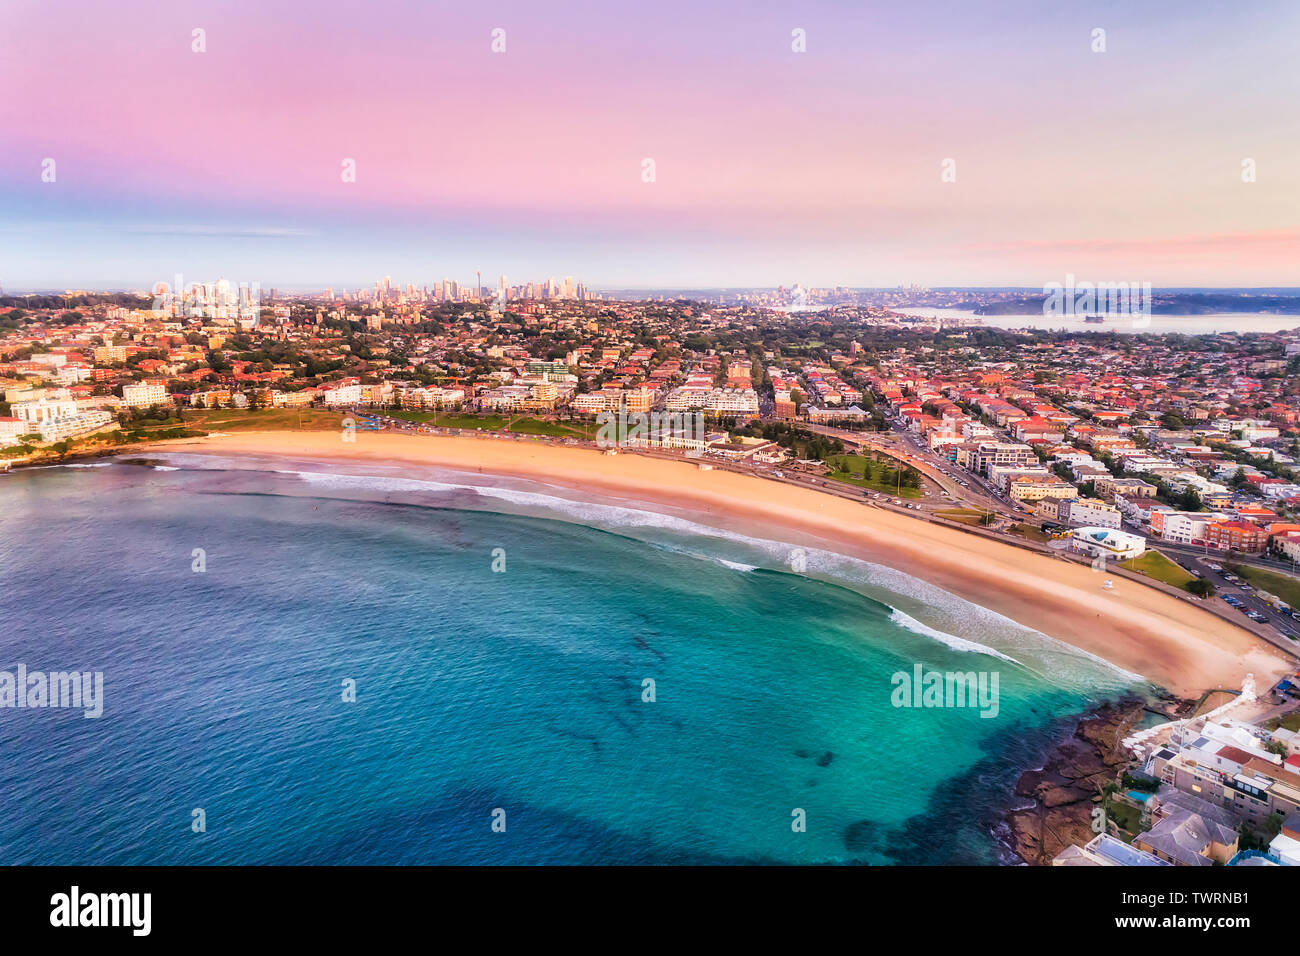 Clean arc of wide sandy Bondi Beach in Sydney at sunrise with pink sky and calm smooth waves floating surfers and surrounded by Eastern suburbs. Stock Photo